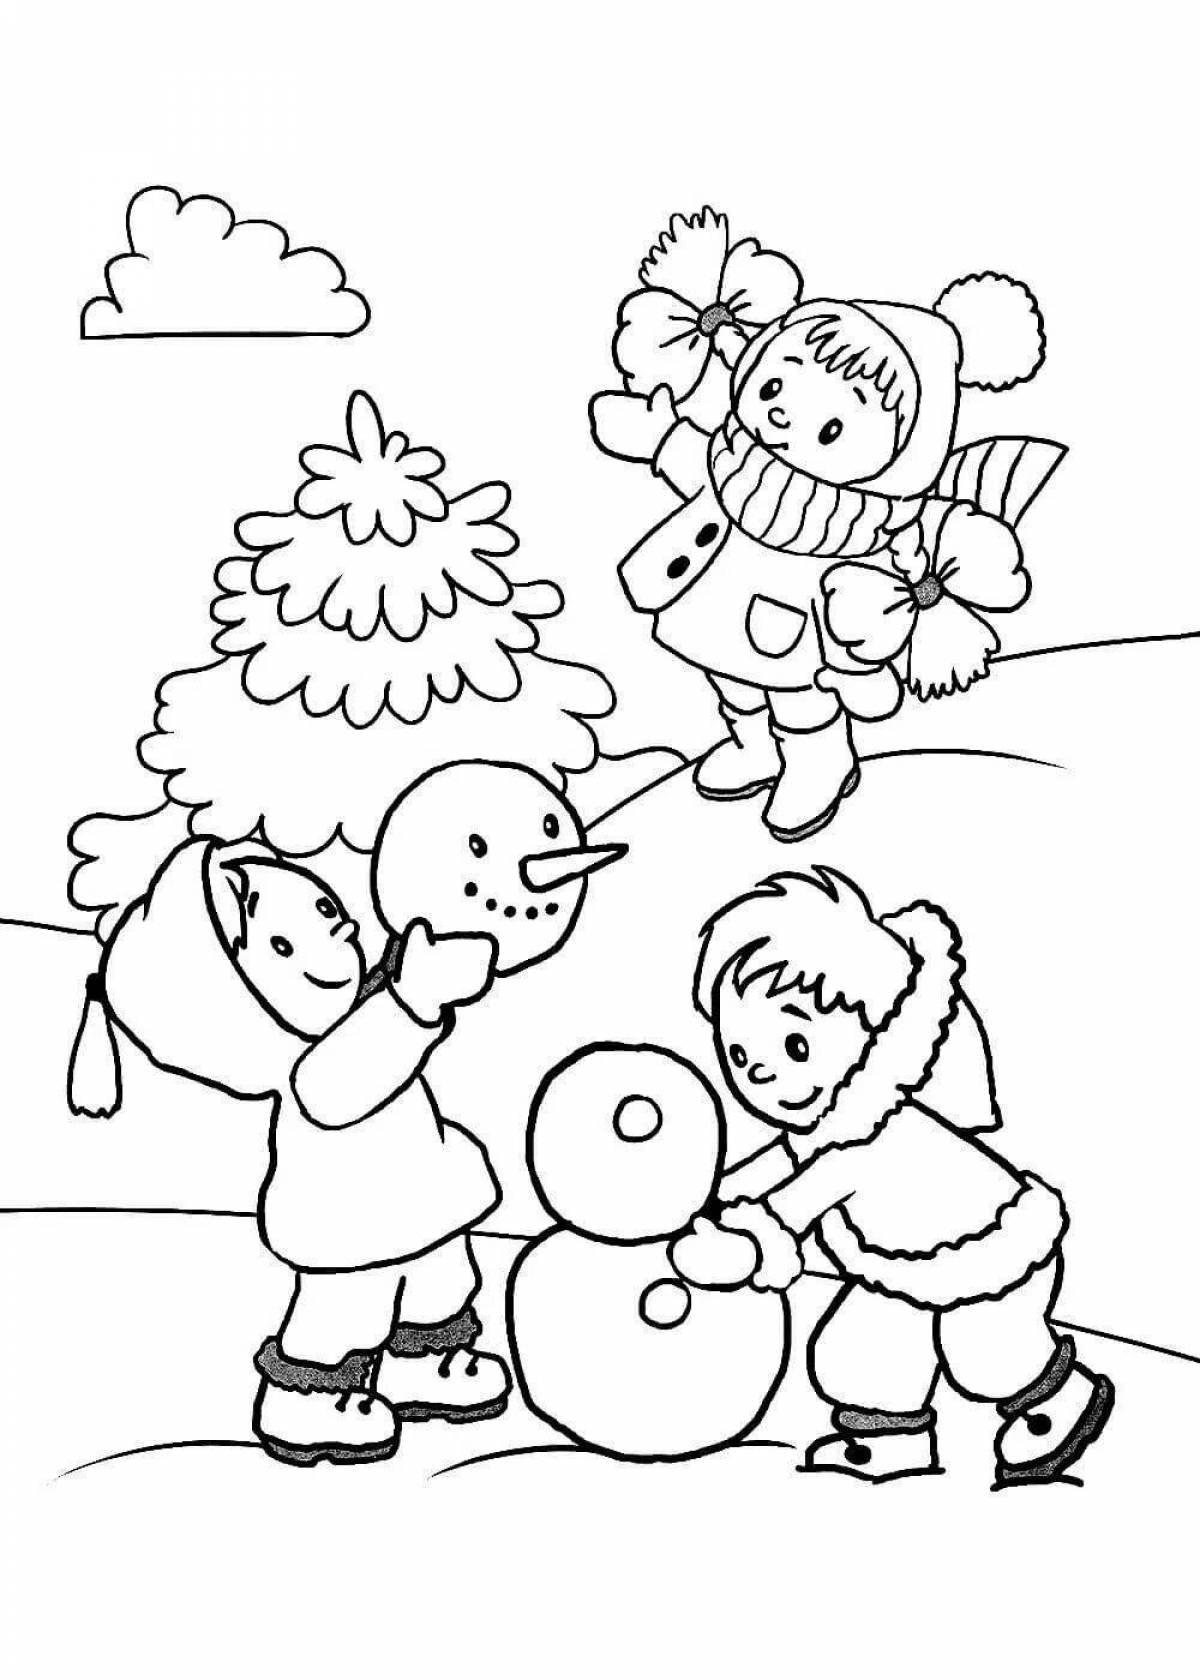 Adorable coloring book for kids outdoors in winter